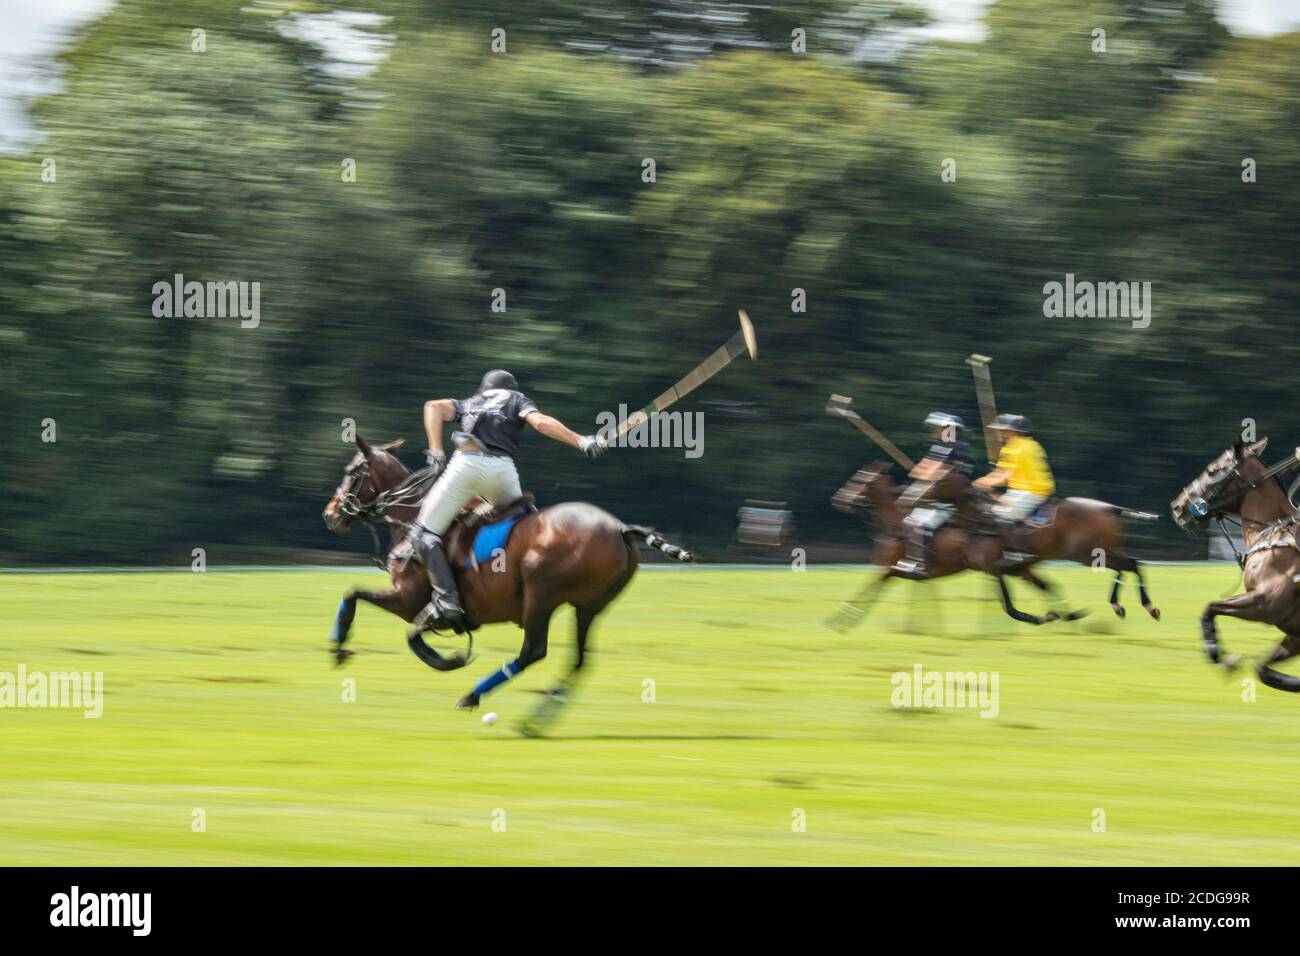 Polo players taking part in a competitive match in Cirencester Park in Gloucestershire. Known as 'The Sport of Kings'. A game consists of 8 chukkas. Stock Photo